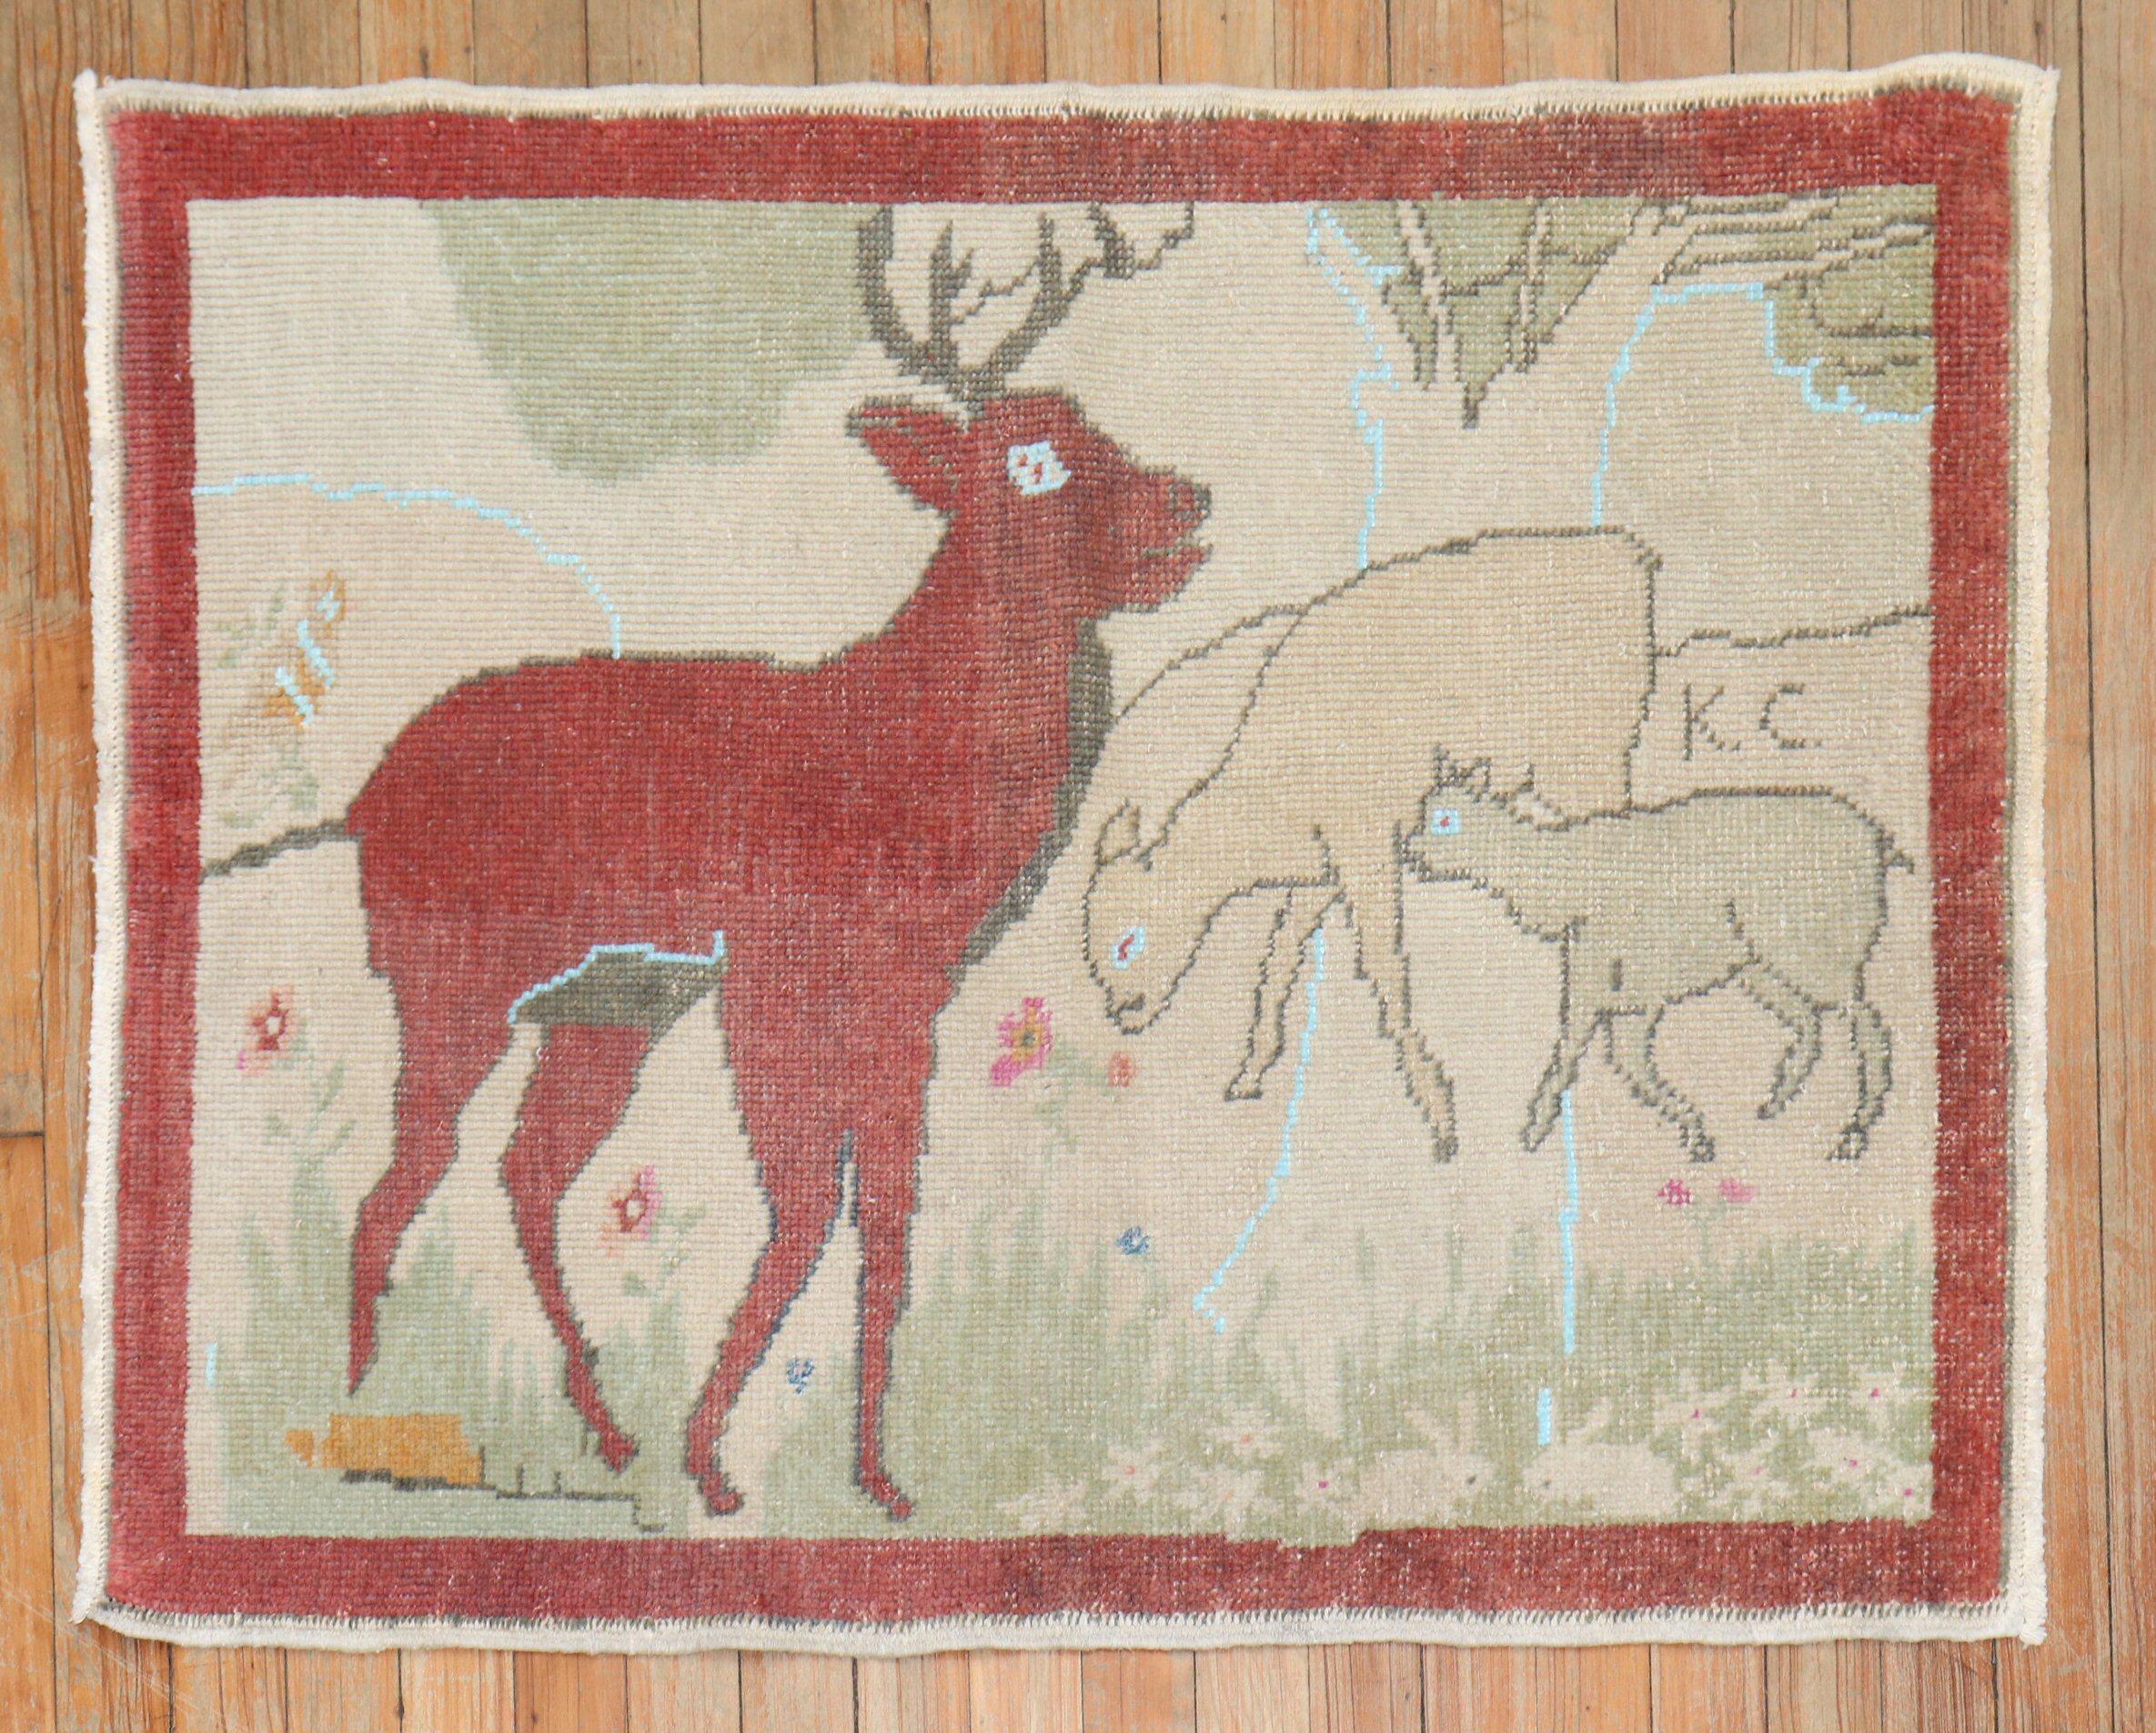 Mid-20th Century Turkish Rug depicting a Deer and 2 goats. Initialed KC, probably 1st letter of first and last name of the weaver

Measures: 2'7'' x 3'3''.